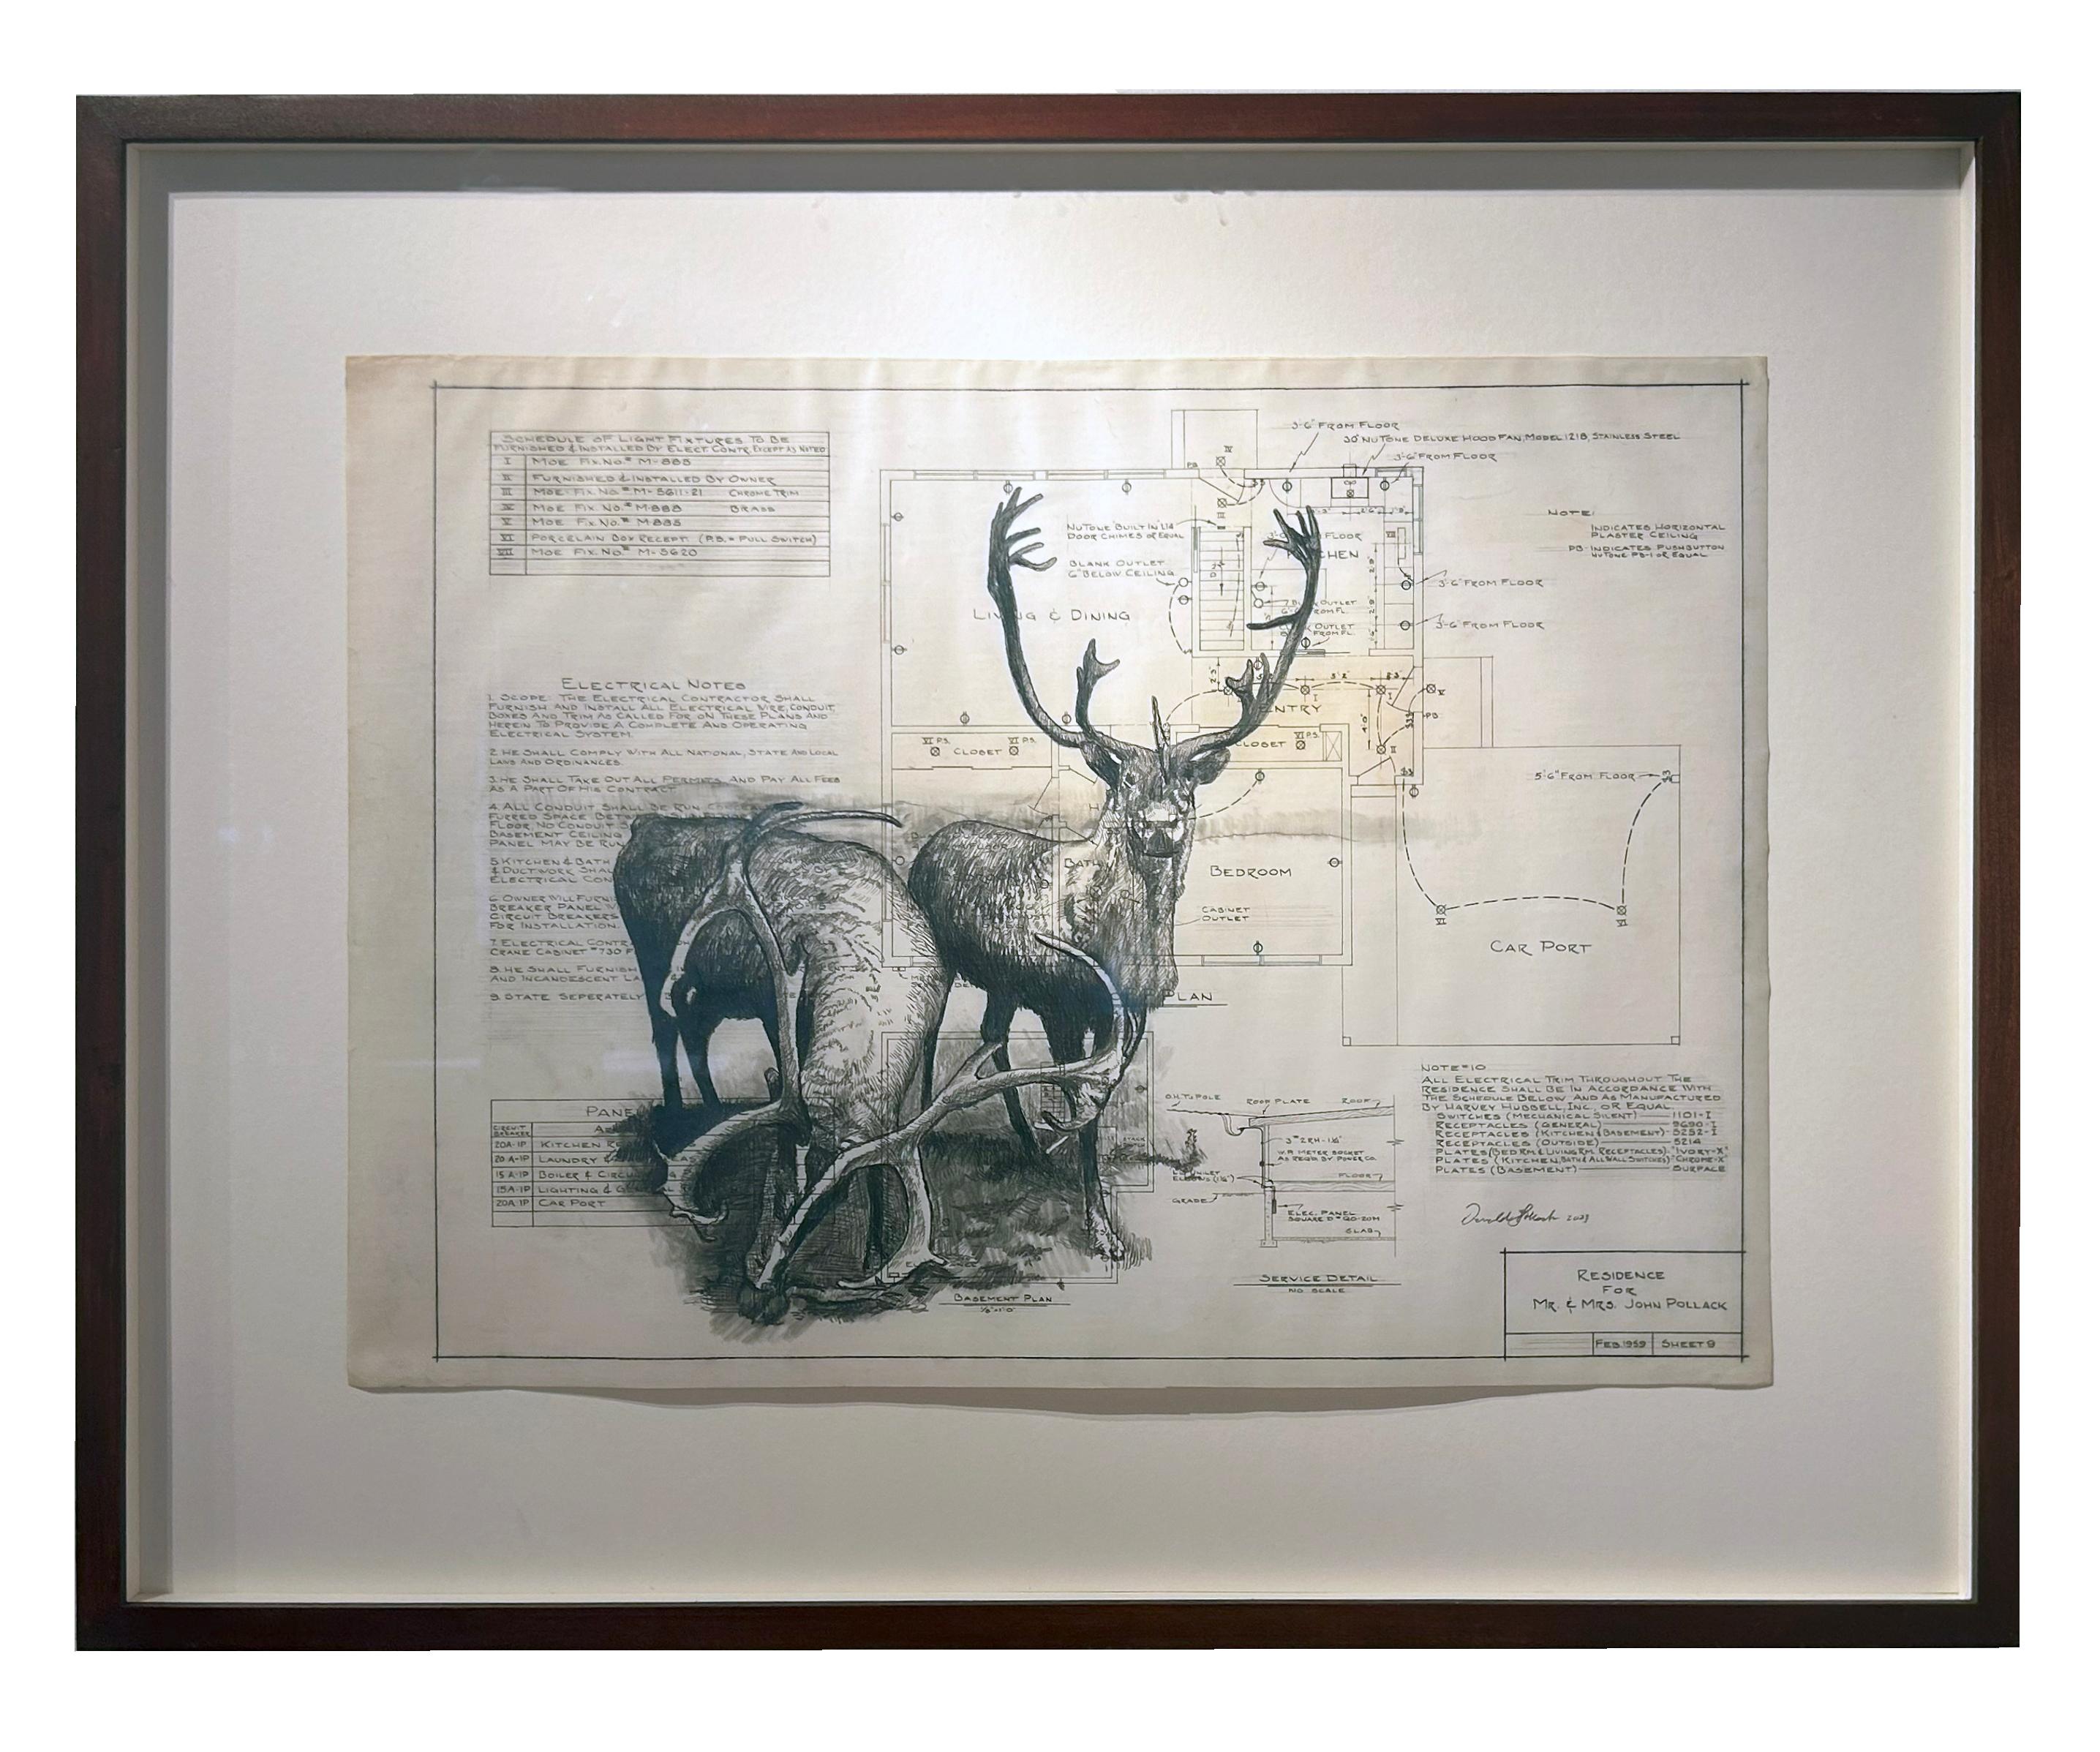 Don Pollack Animal Art - Clear Passage - Deer in Graphite on Antique Architectural Drawings 